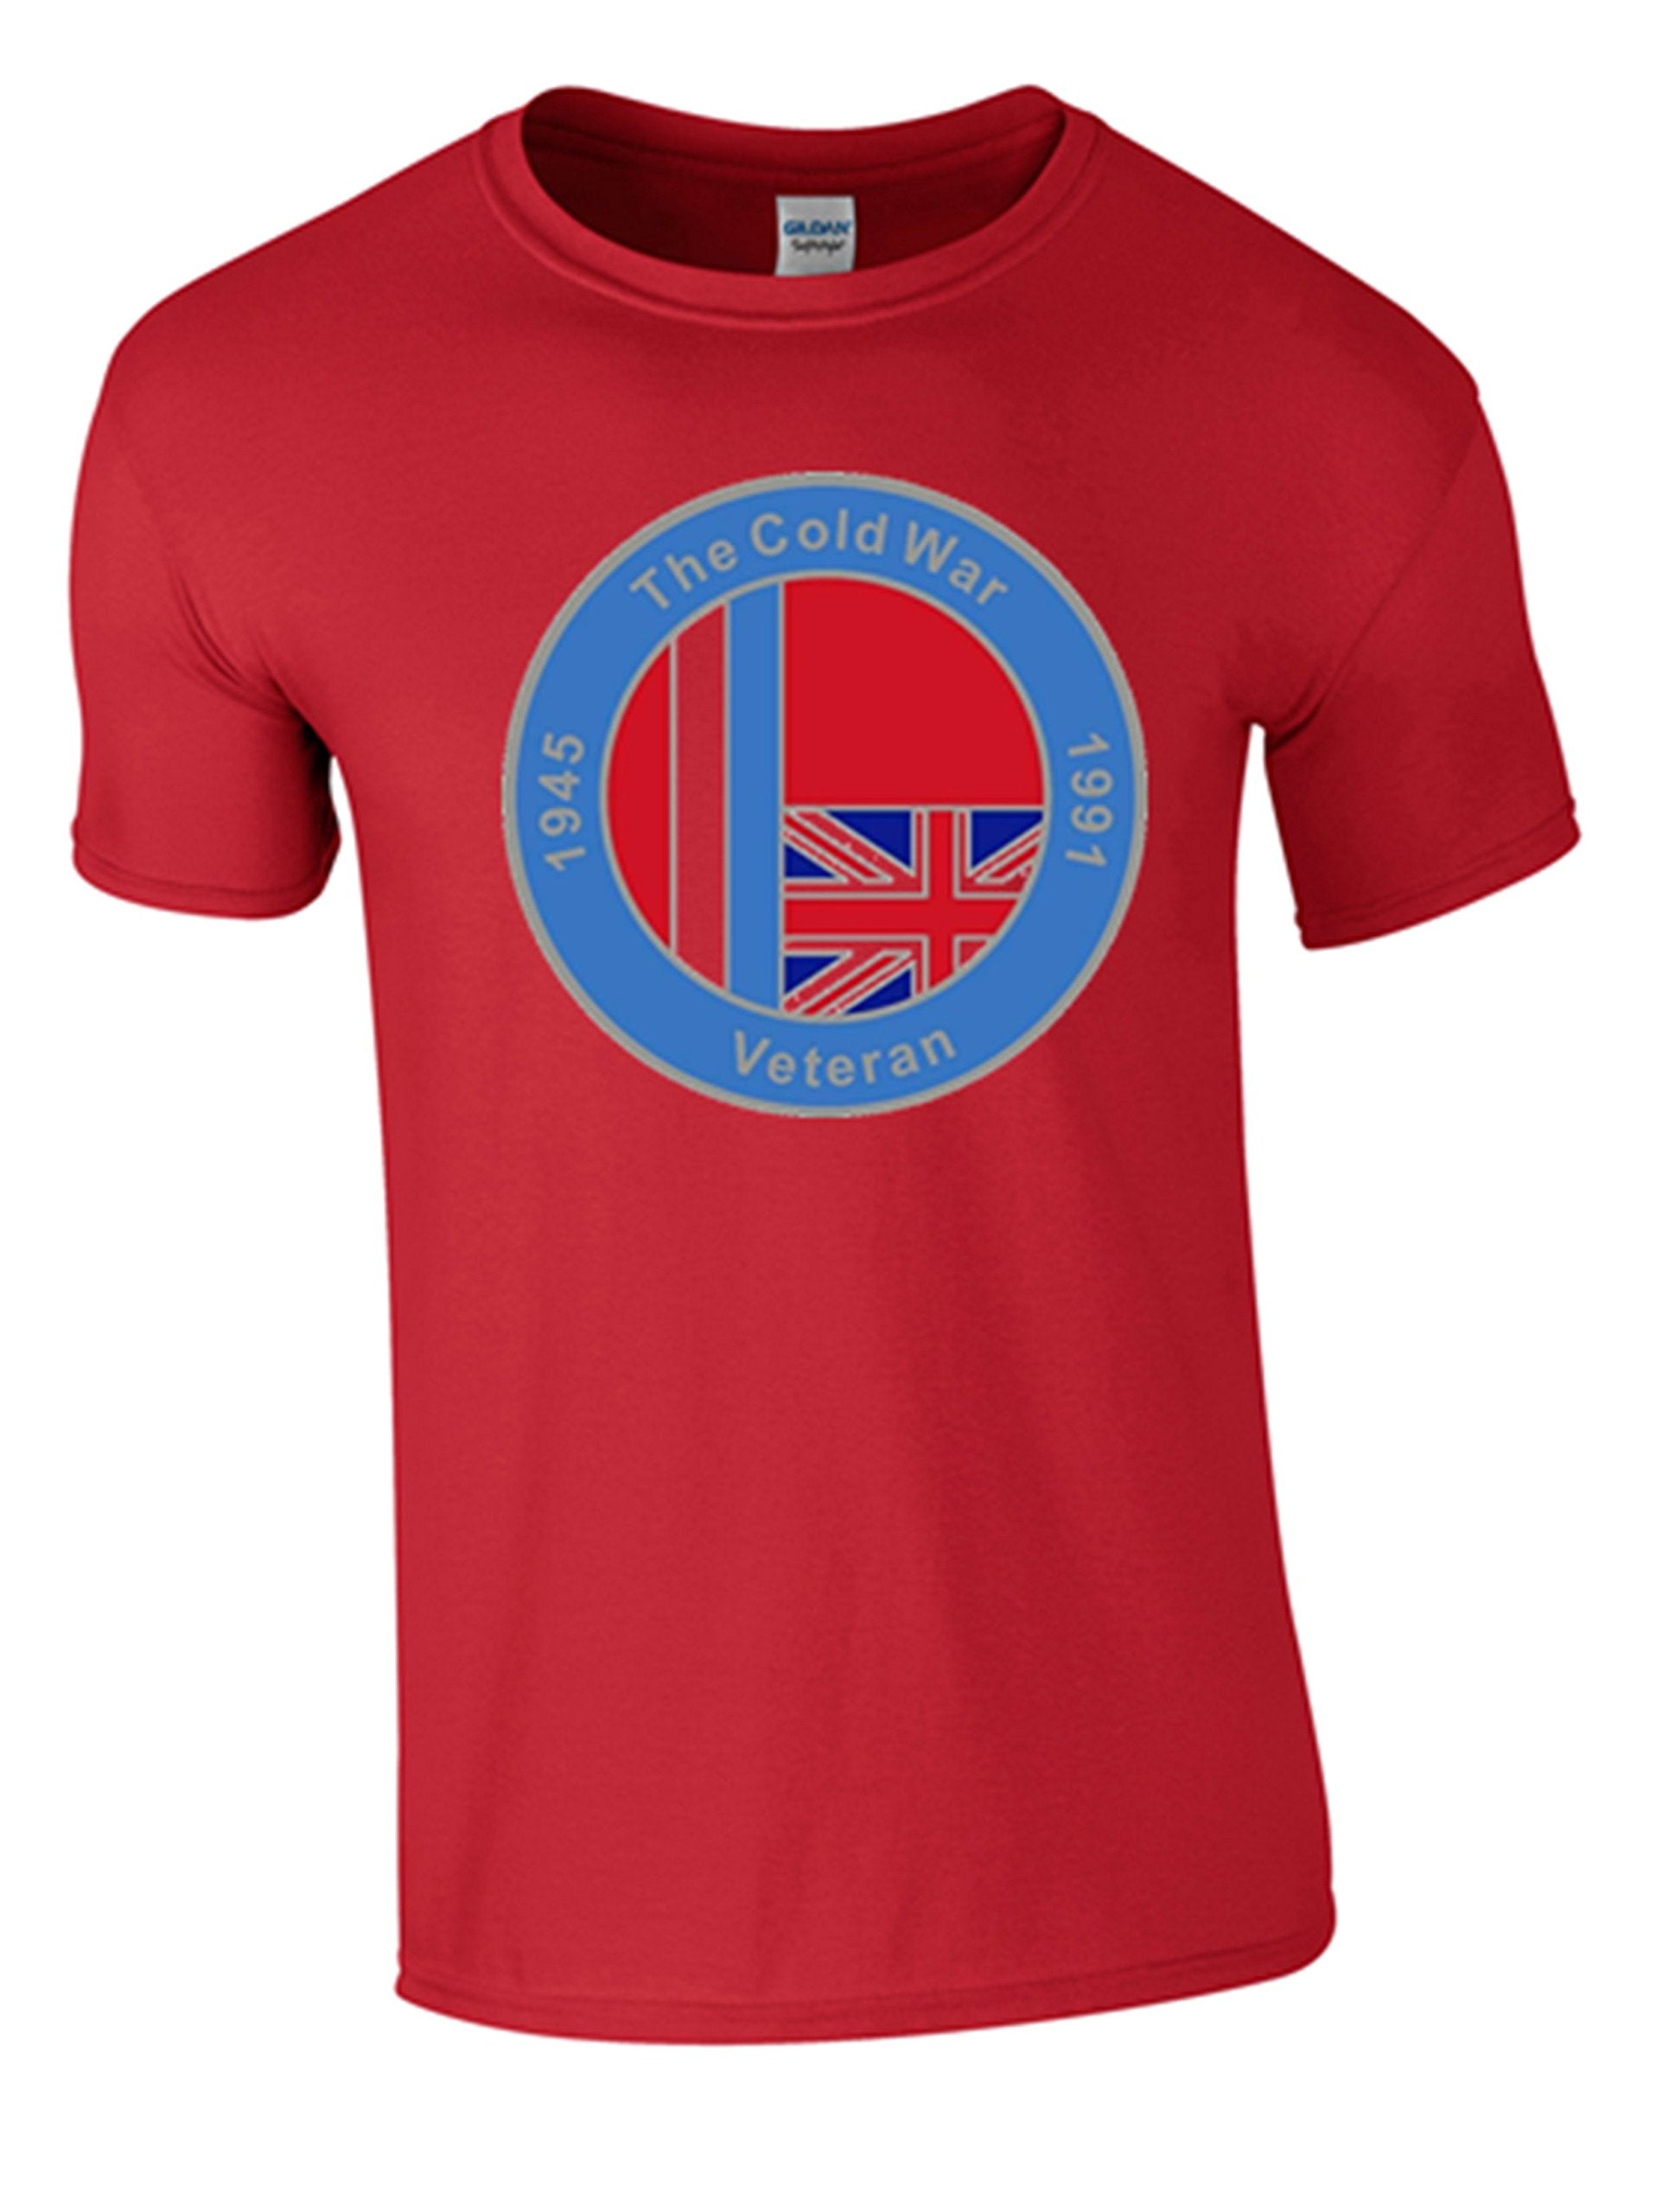 Bear Essentials Clothing. Cold War Op Banner T/Shirt (XL, Red) - Army 1157 kit Army 1157 Kit